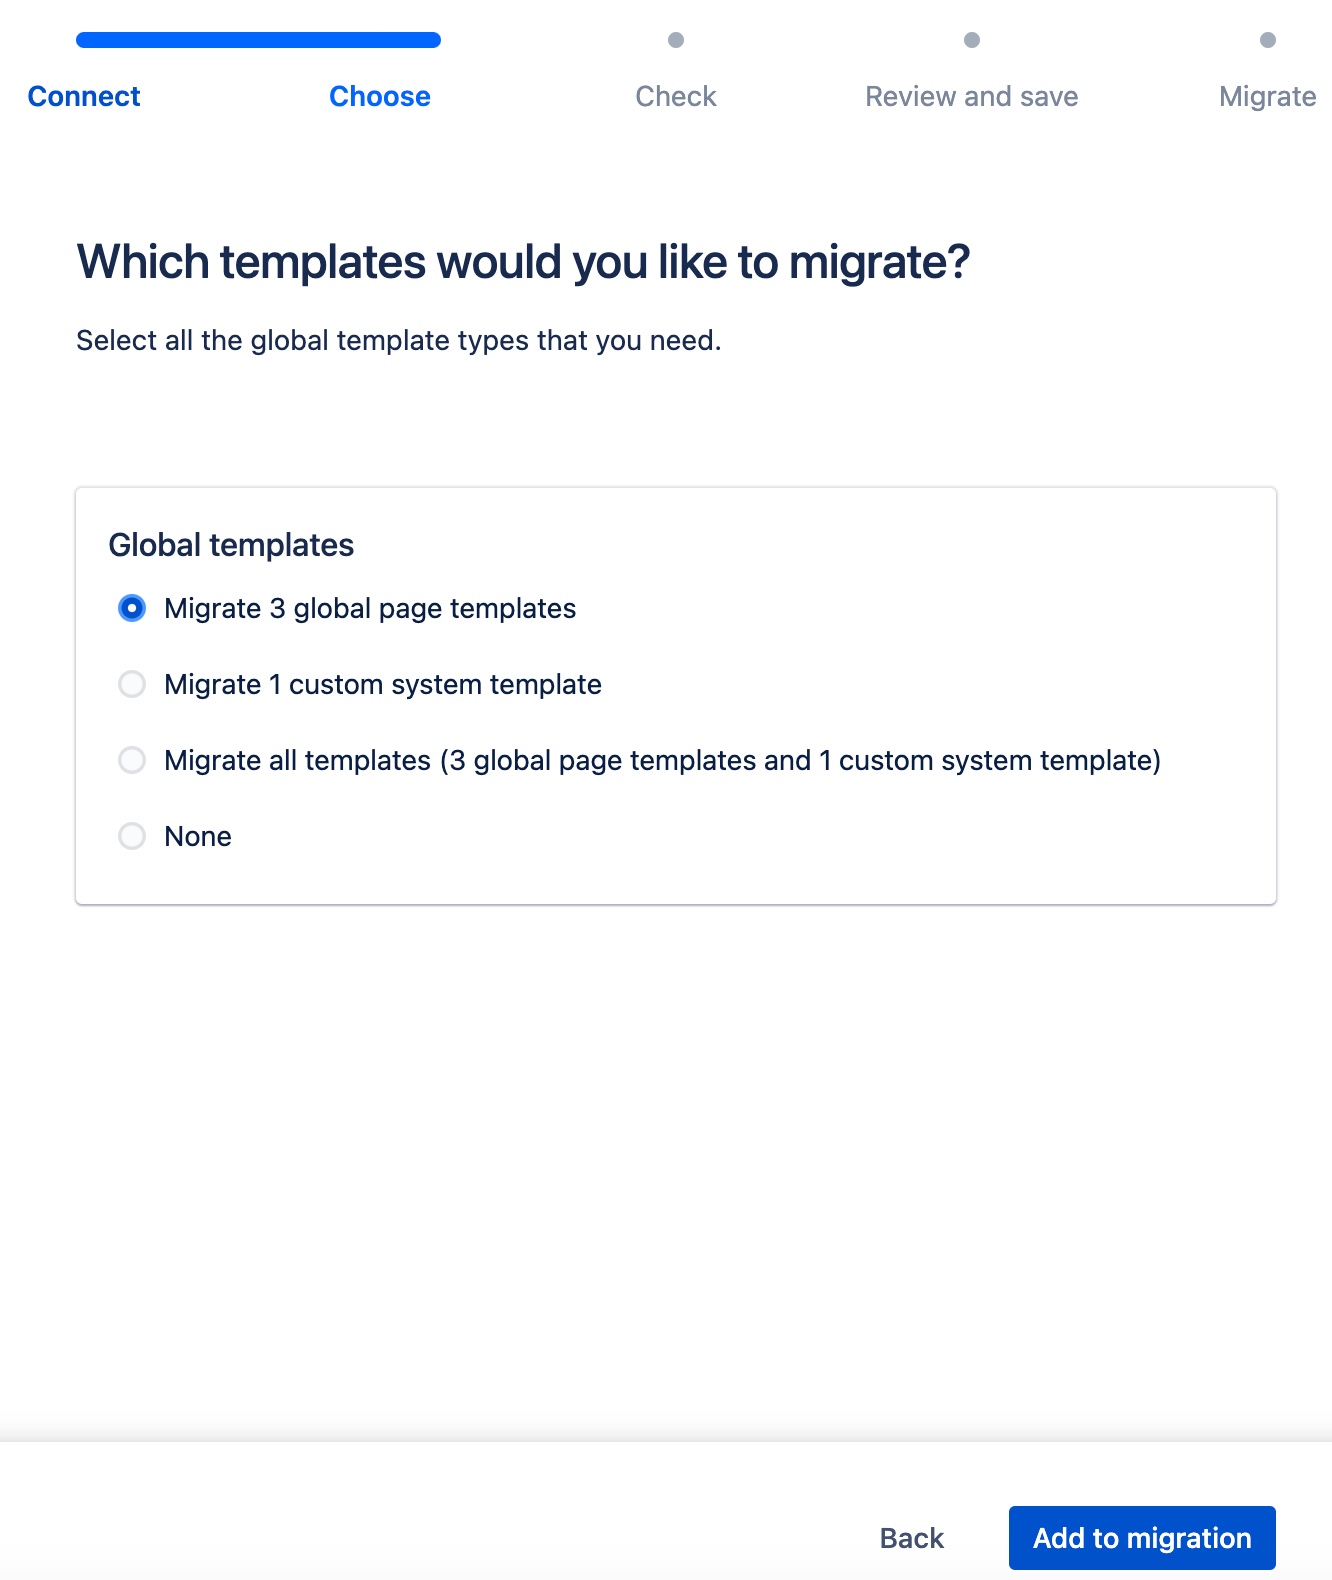 Select the global template to migrate